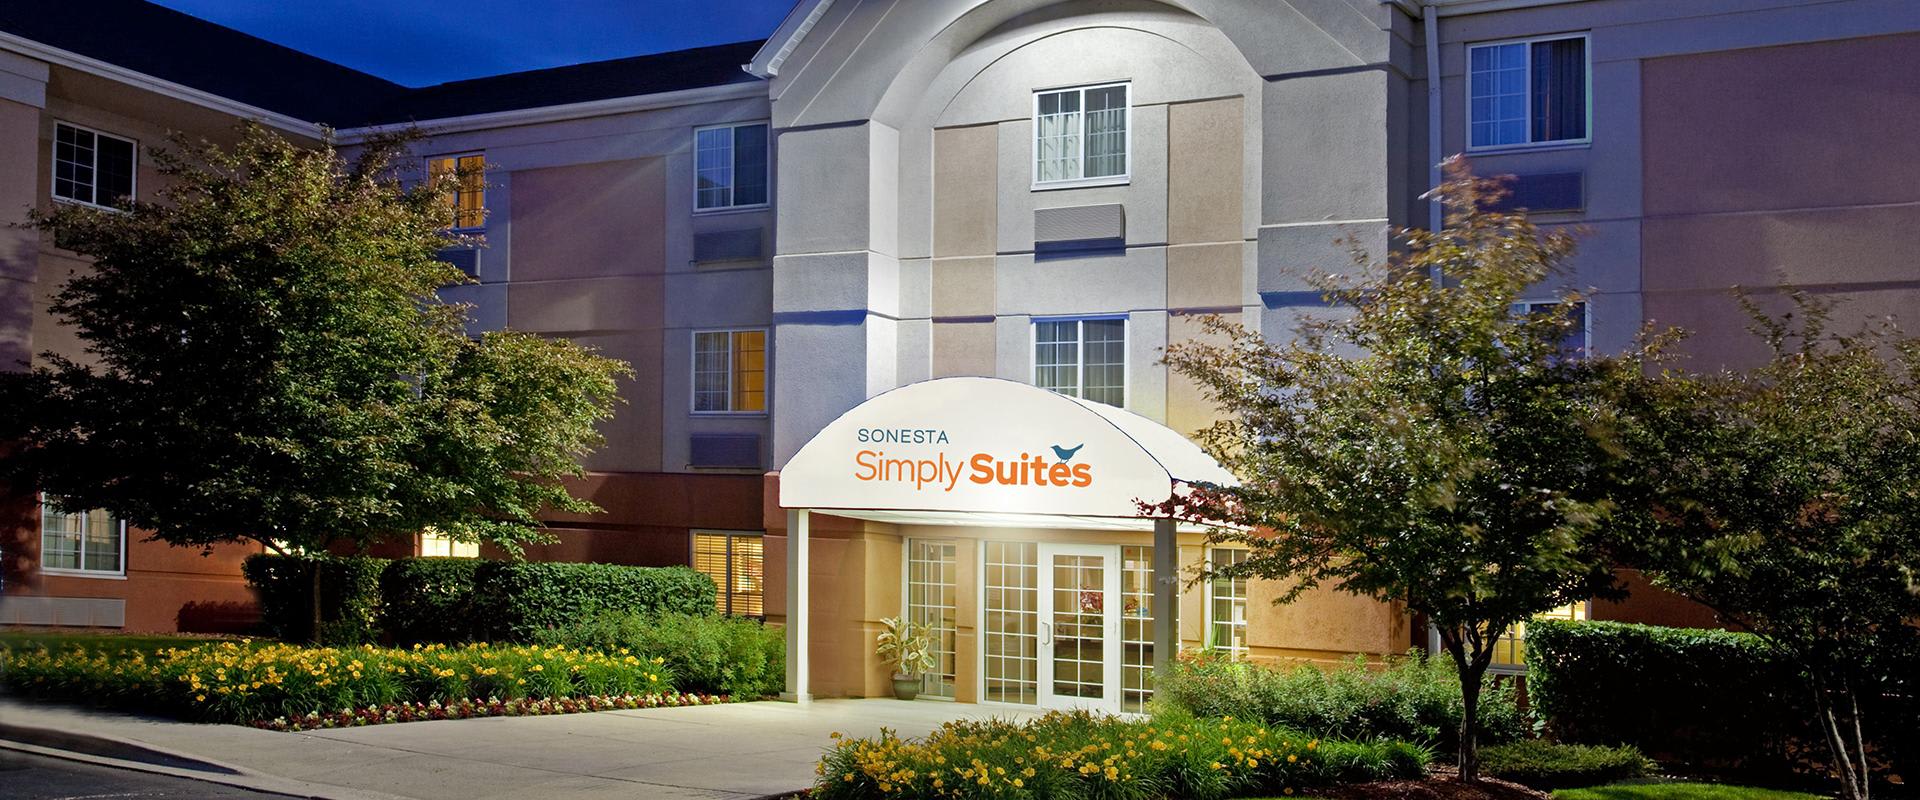 Simply Suites Chicago Waukegan Hotel Entrance